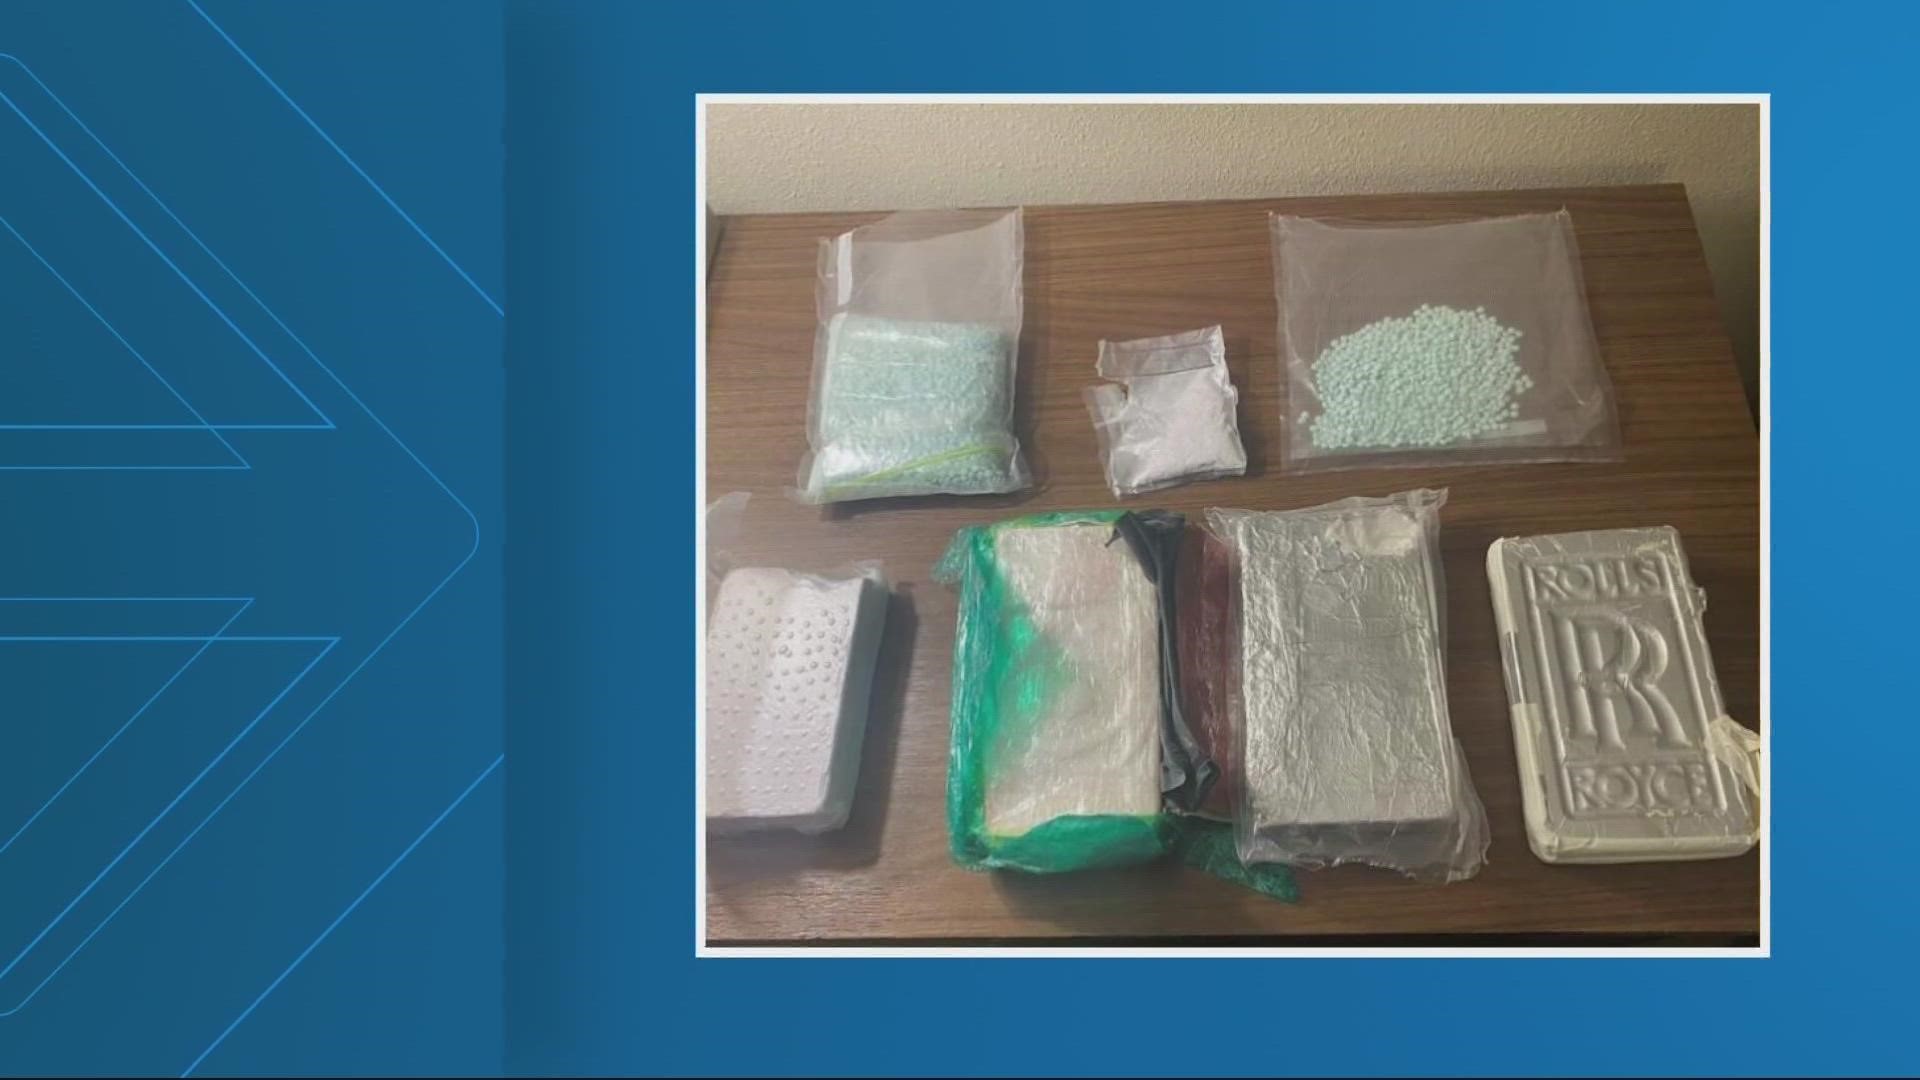 The man also had enough fentanyl pills to kill 2,500 adults, JSO said.